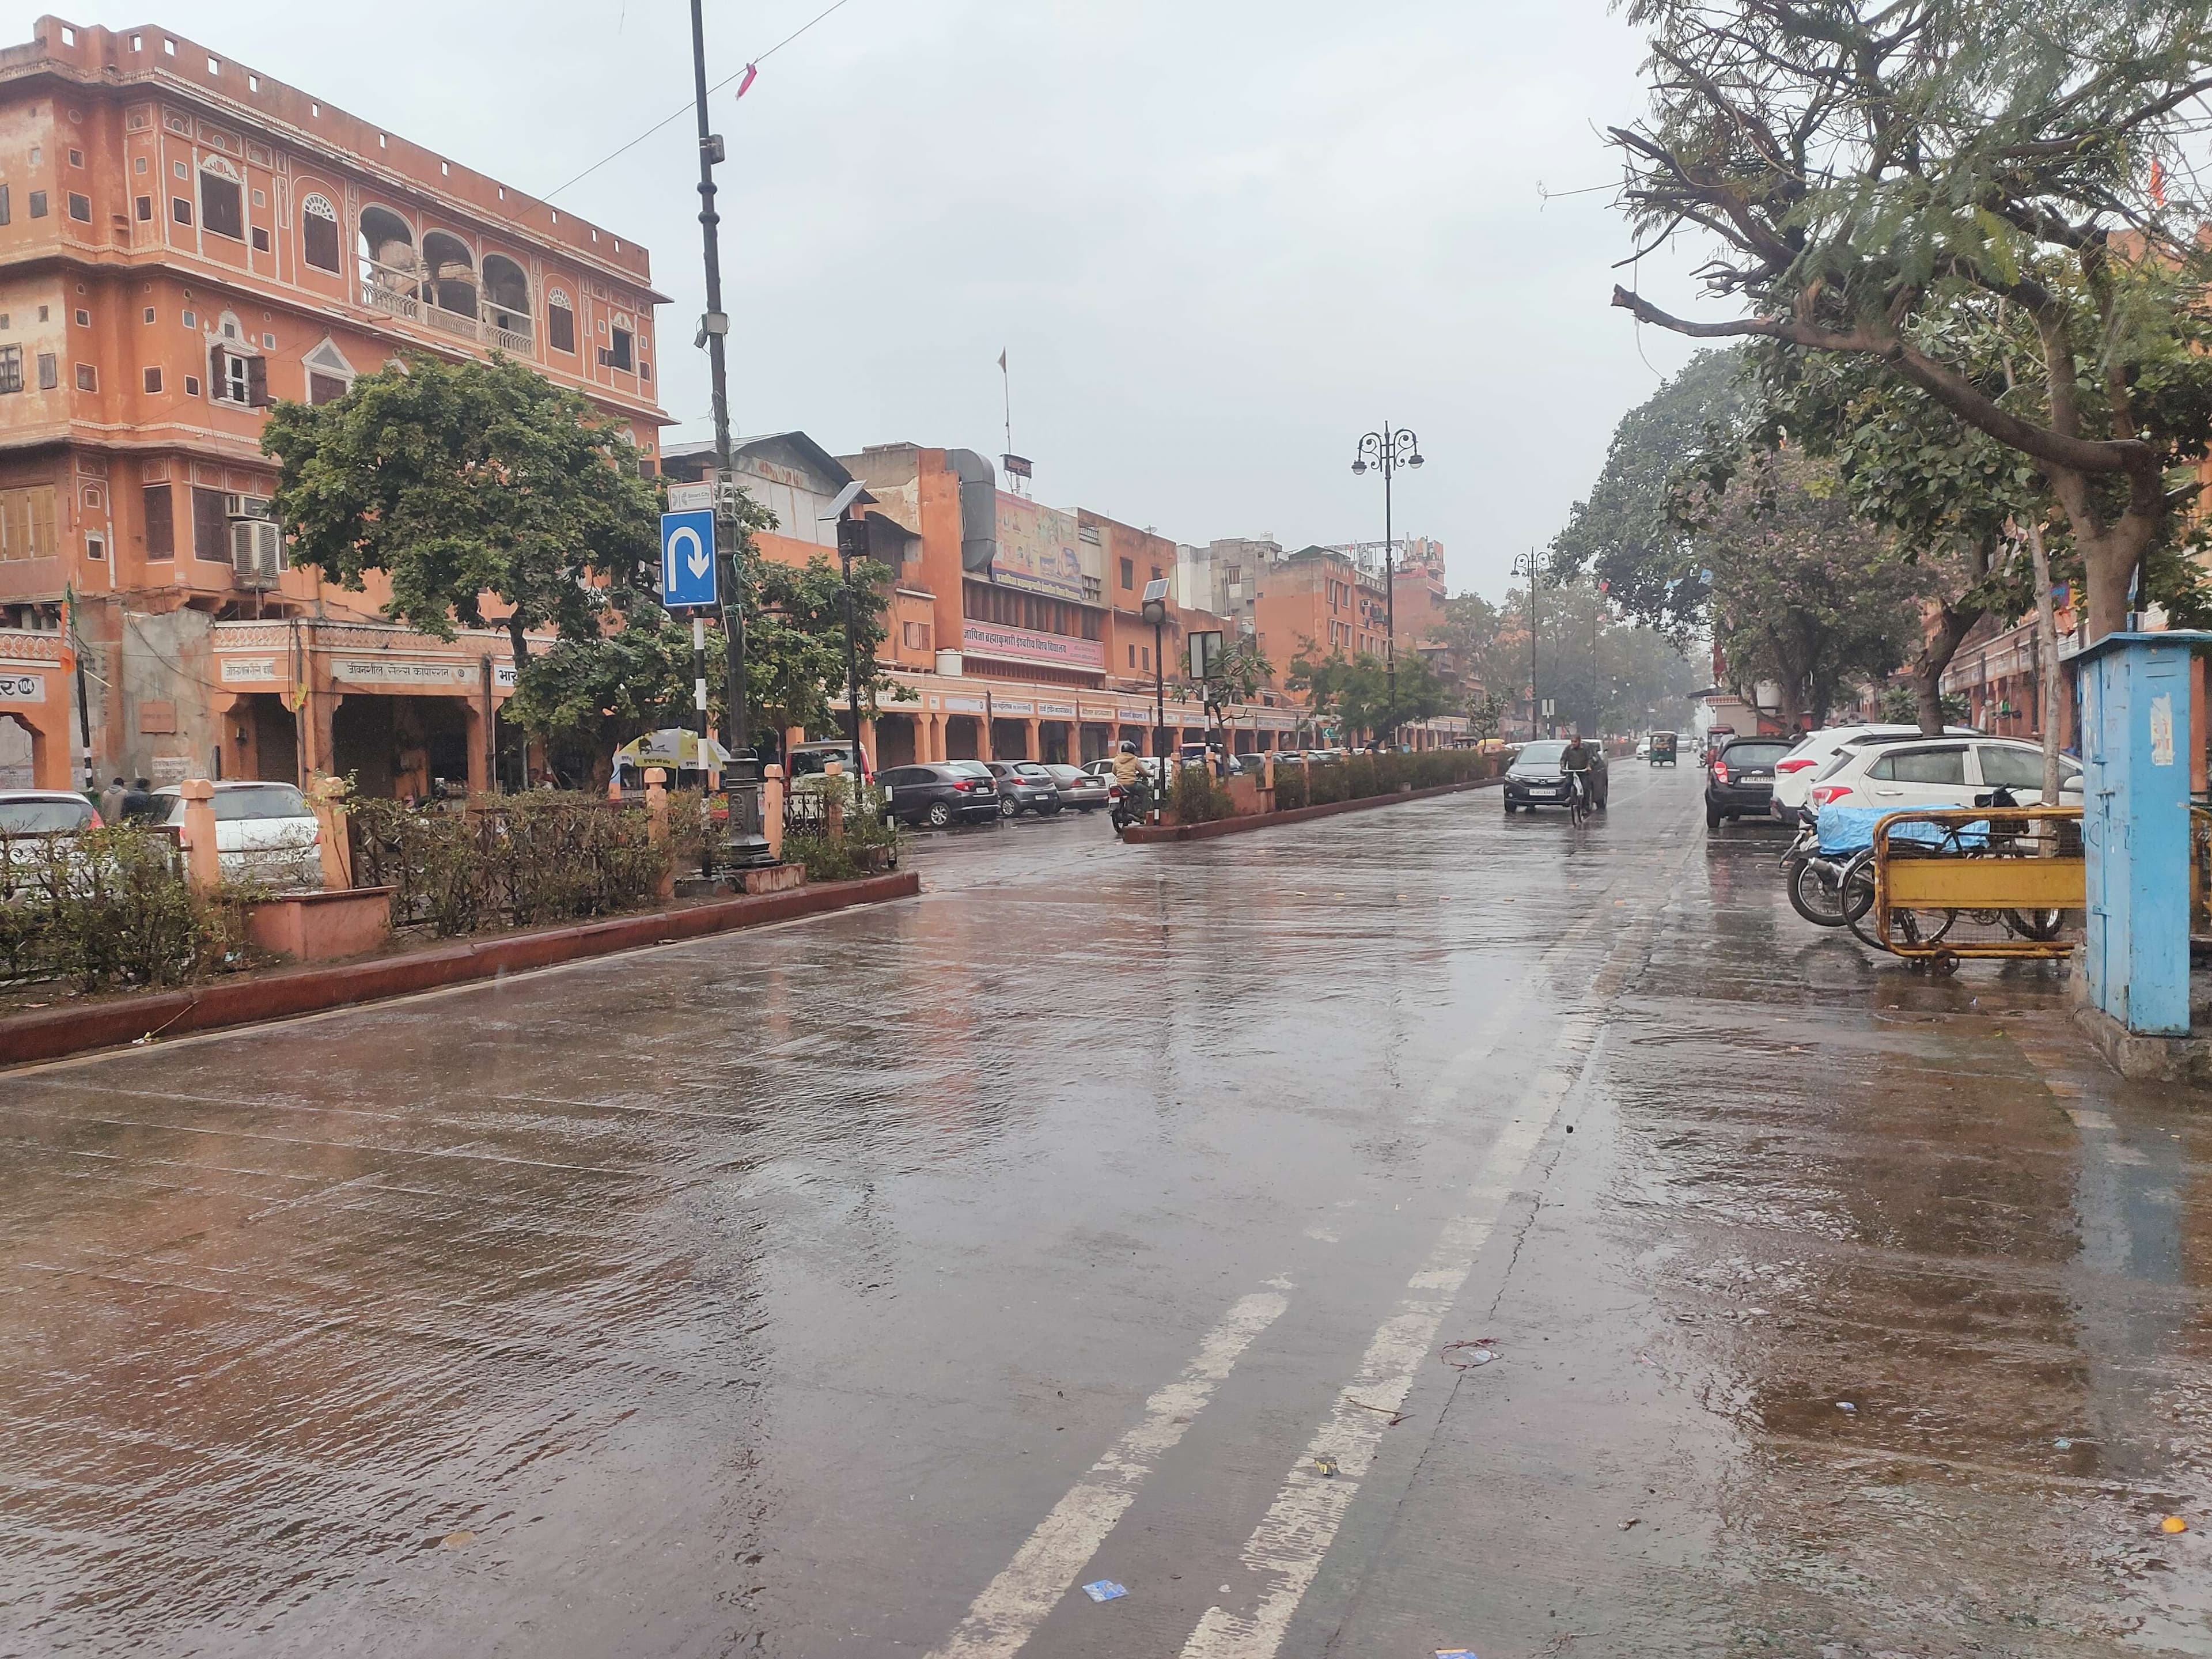 Light and heavy rain throughout the day in Jaipur city